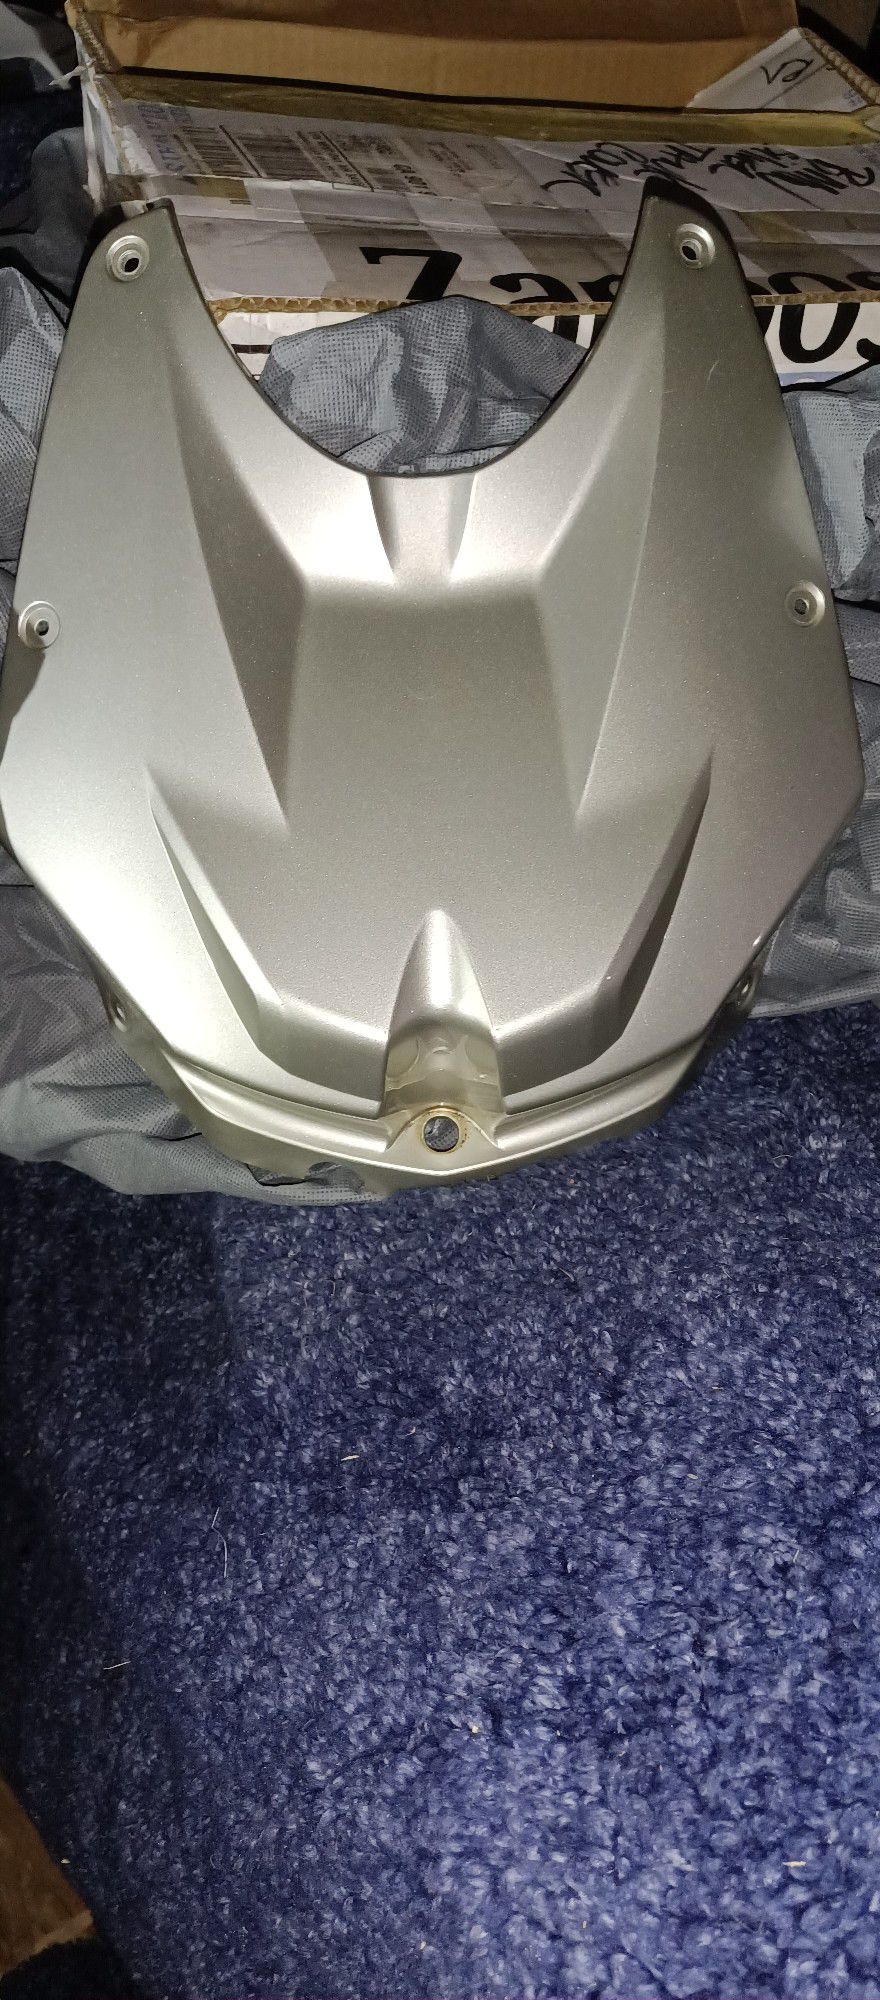 Bmw S1000RR. Gas Tank Cover